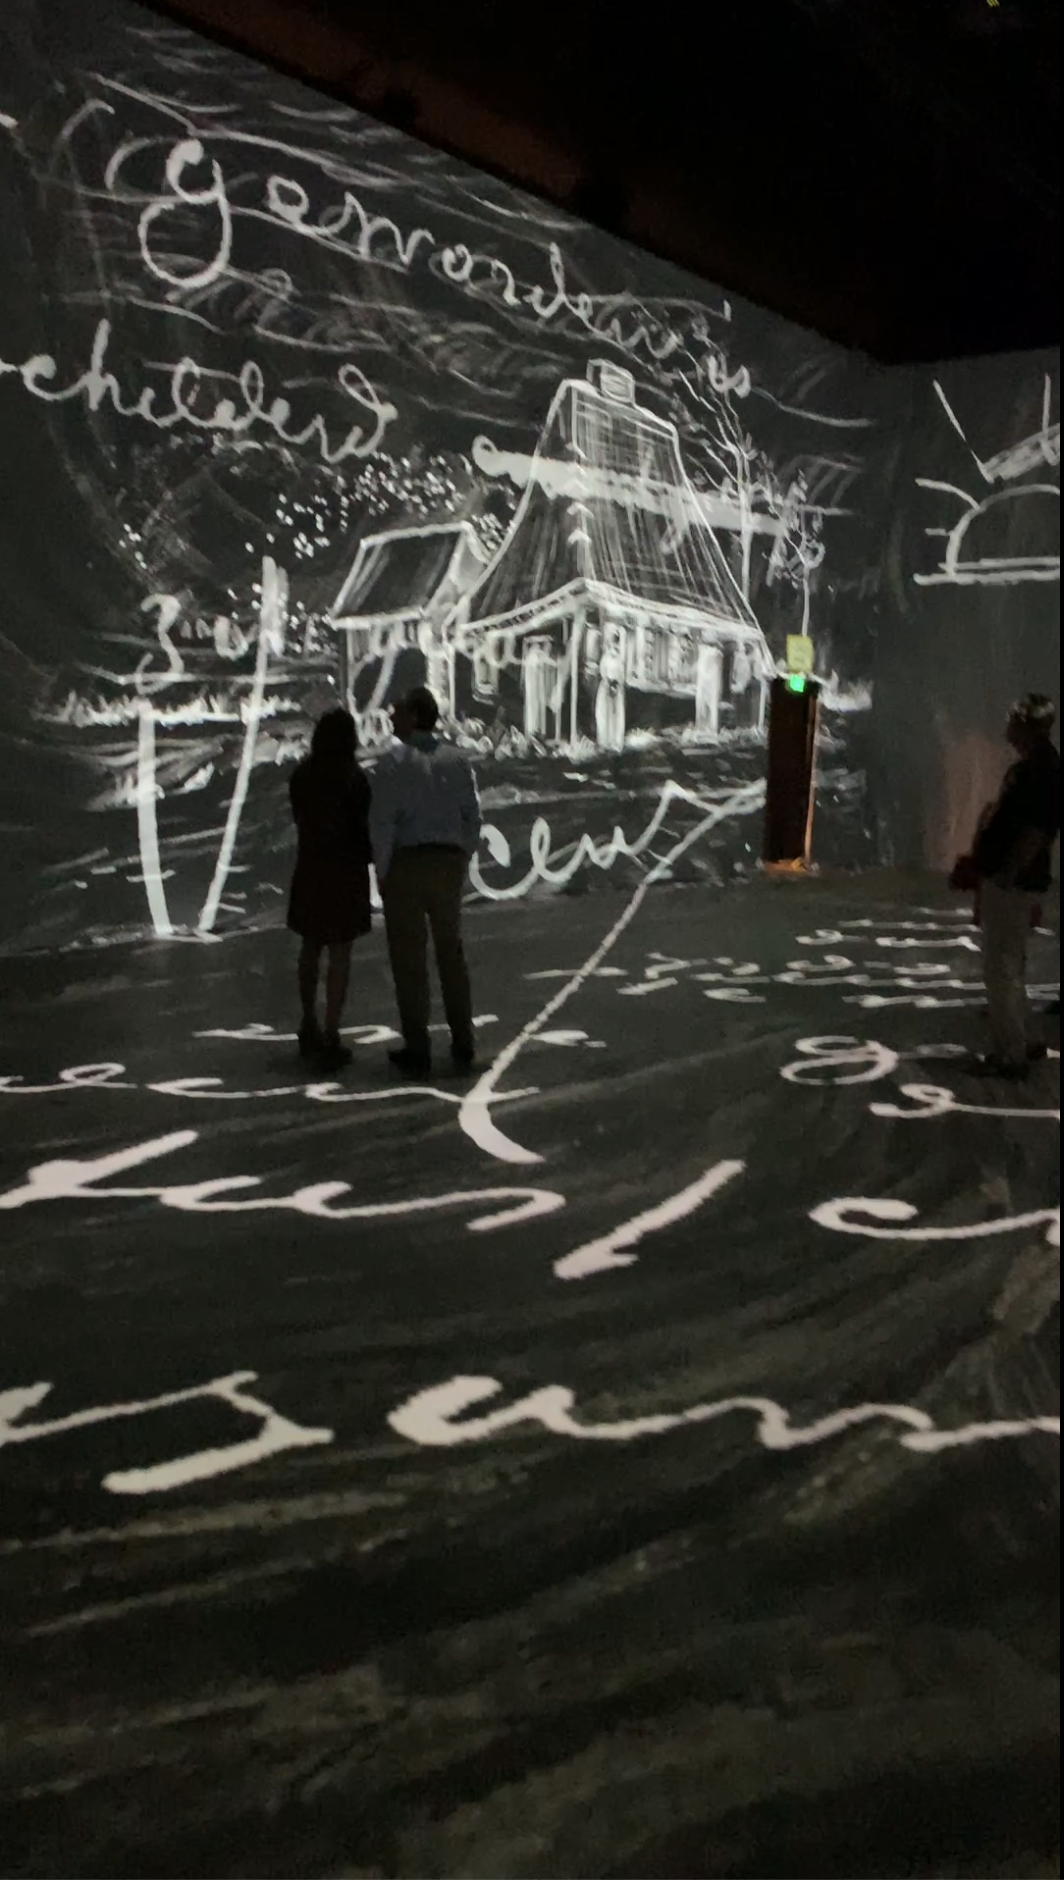 Beyond Van Gogh Immersive Art Experience and Installation